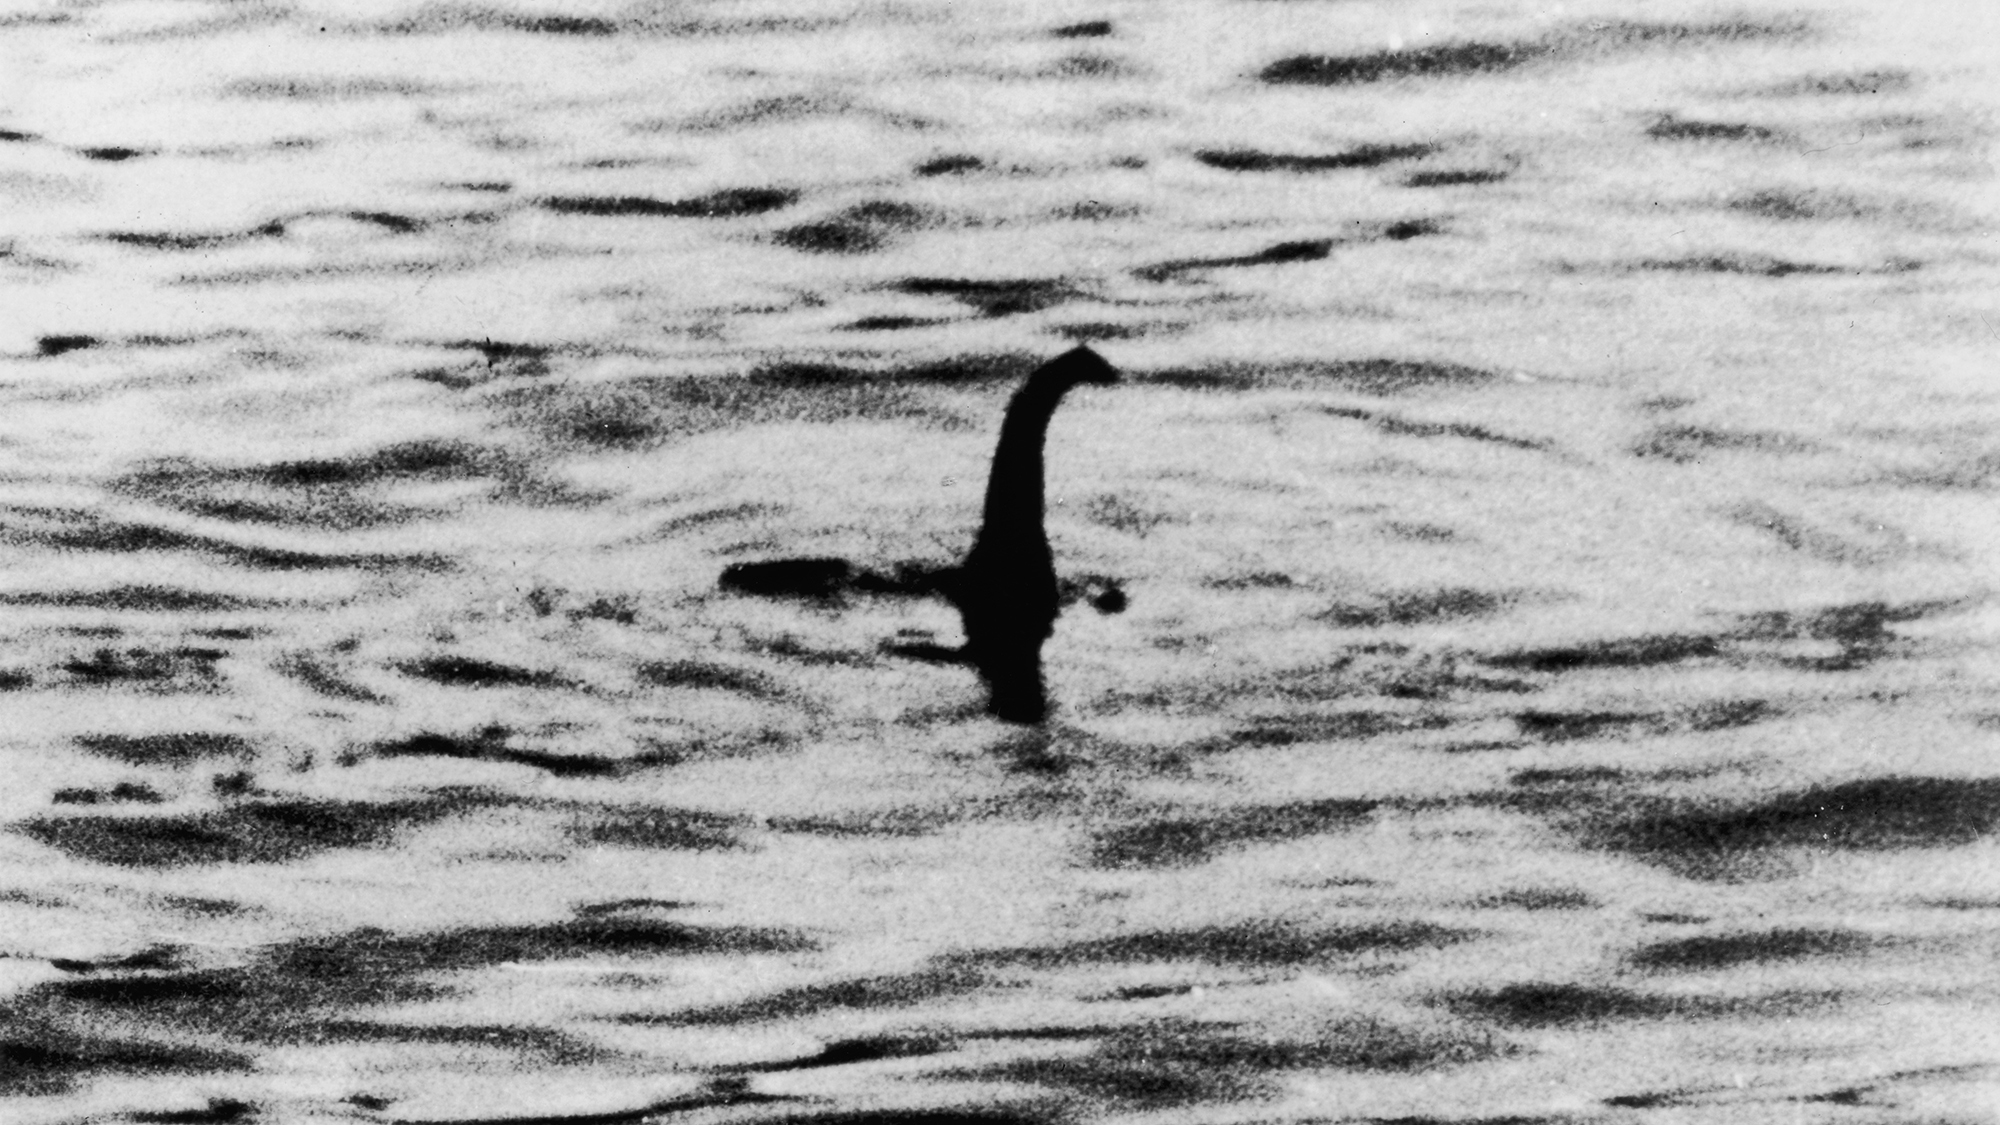 The largest search of Loch Ness in more than 50 years will deploy drones and hydrophones